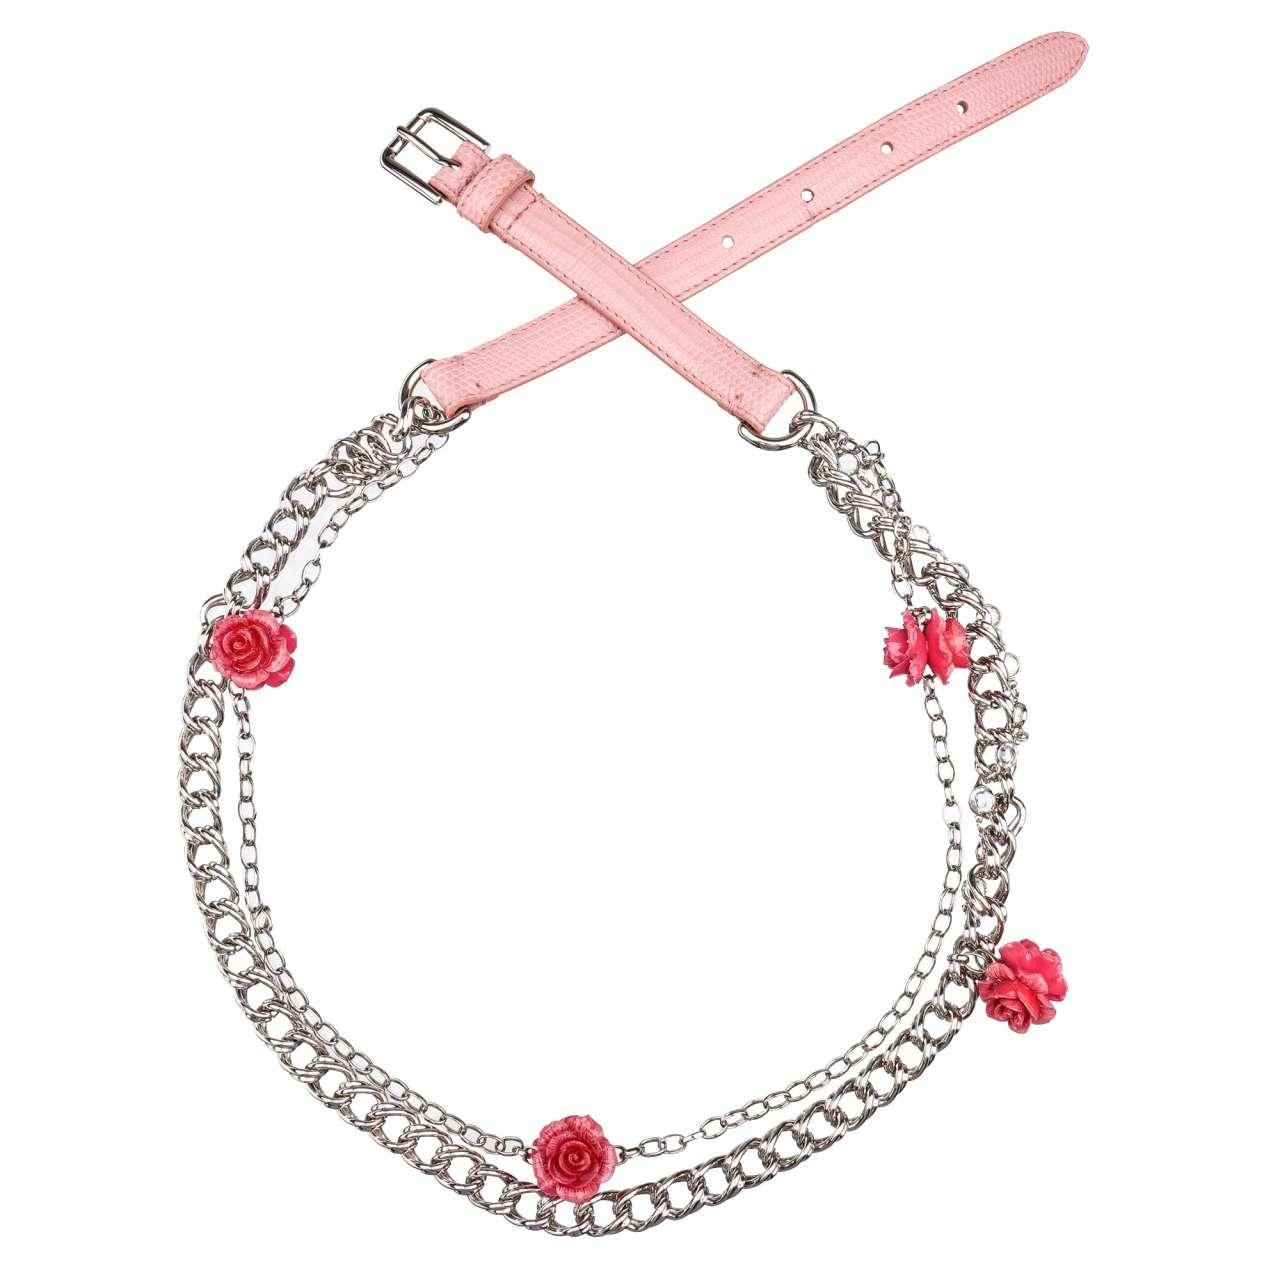 Women's D&G Rose Roses Crystal Lizzard Structure Leather Chain Belt Pink Silver S For Sale